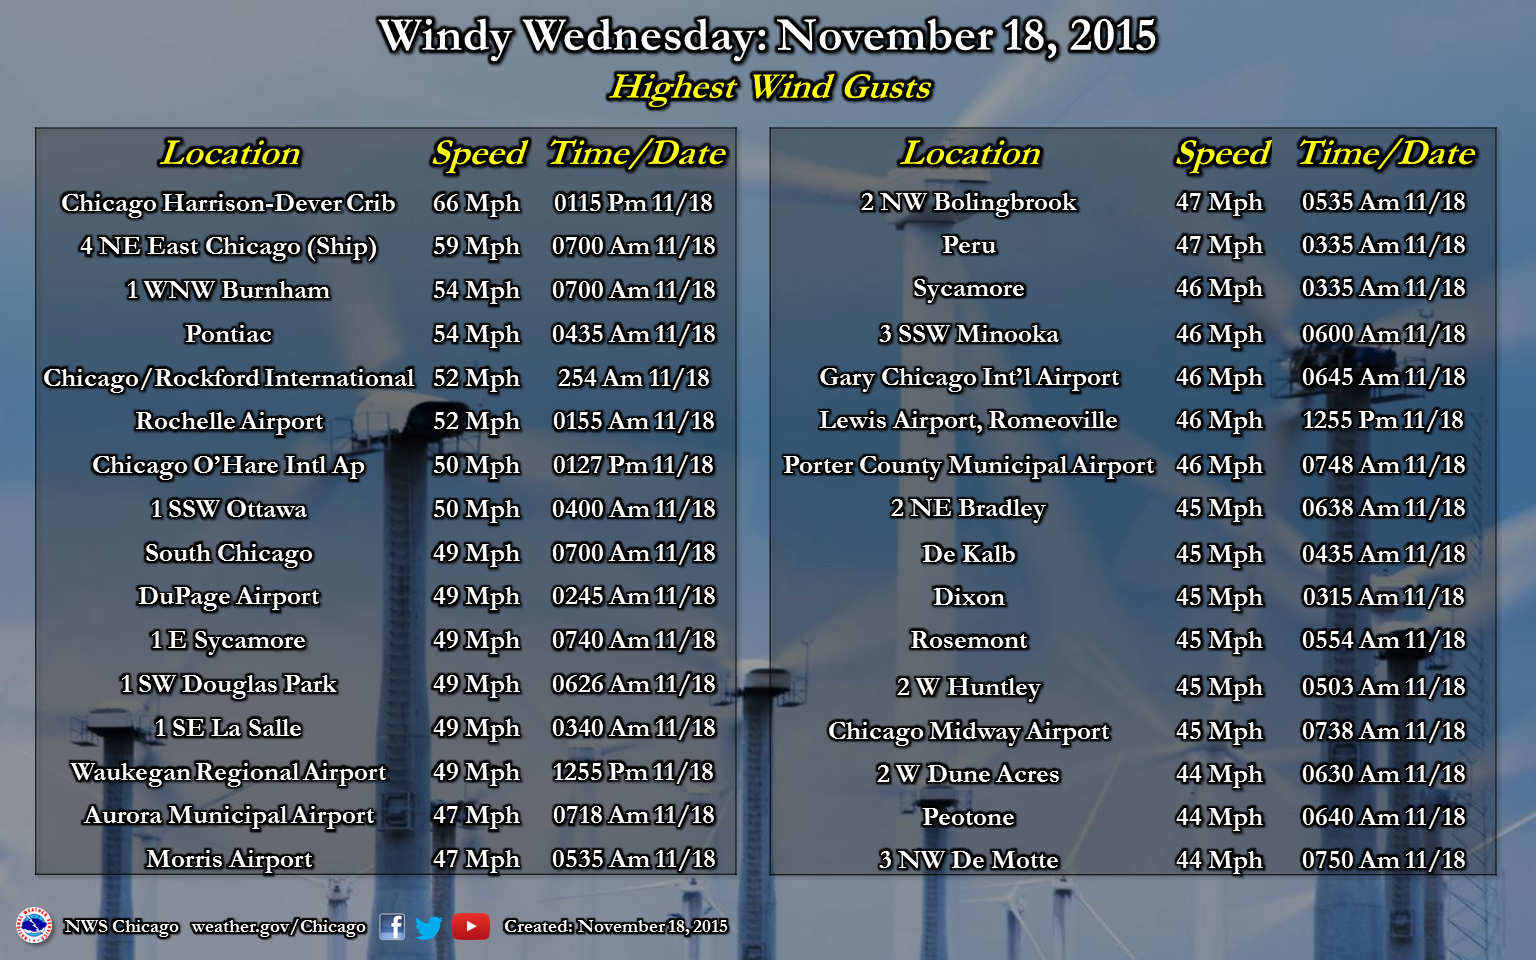 Highest Wind Gusts